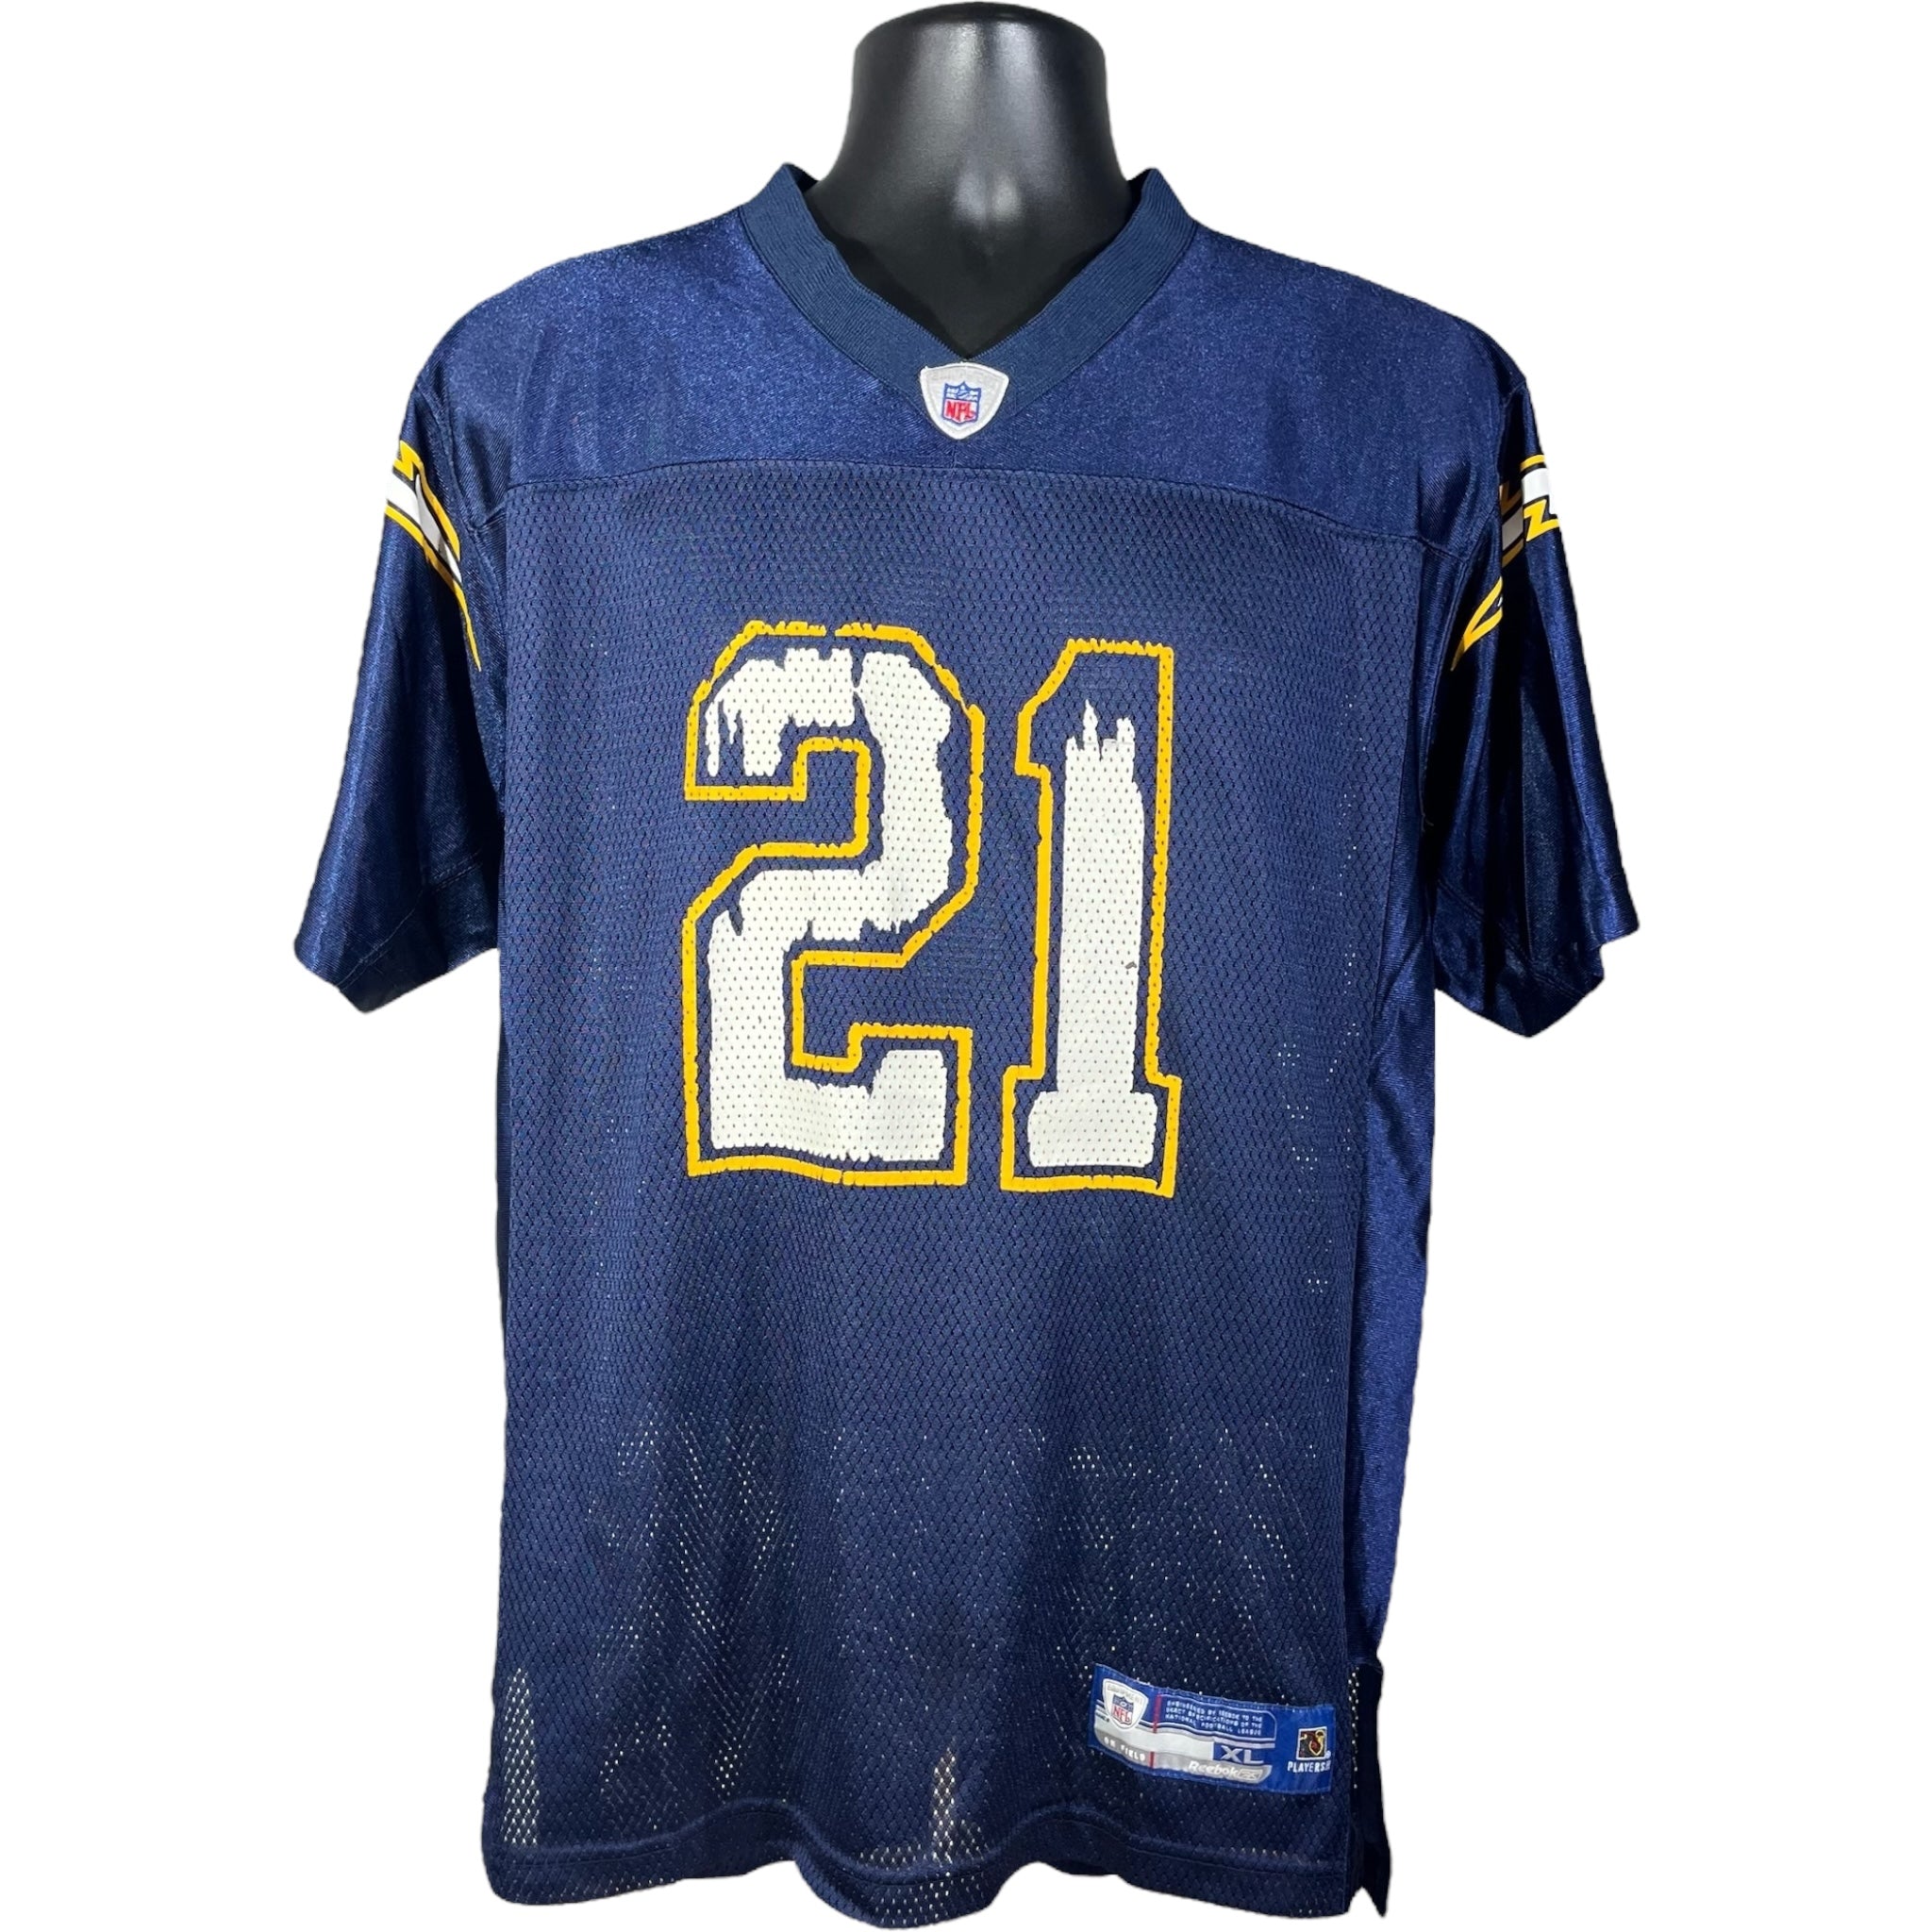 San Diego Chargers Ladanian Tomlinson Jersey